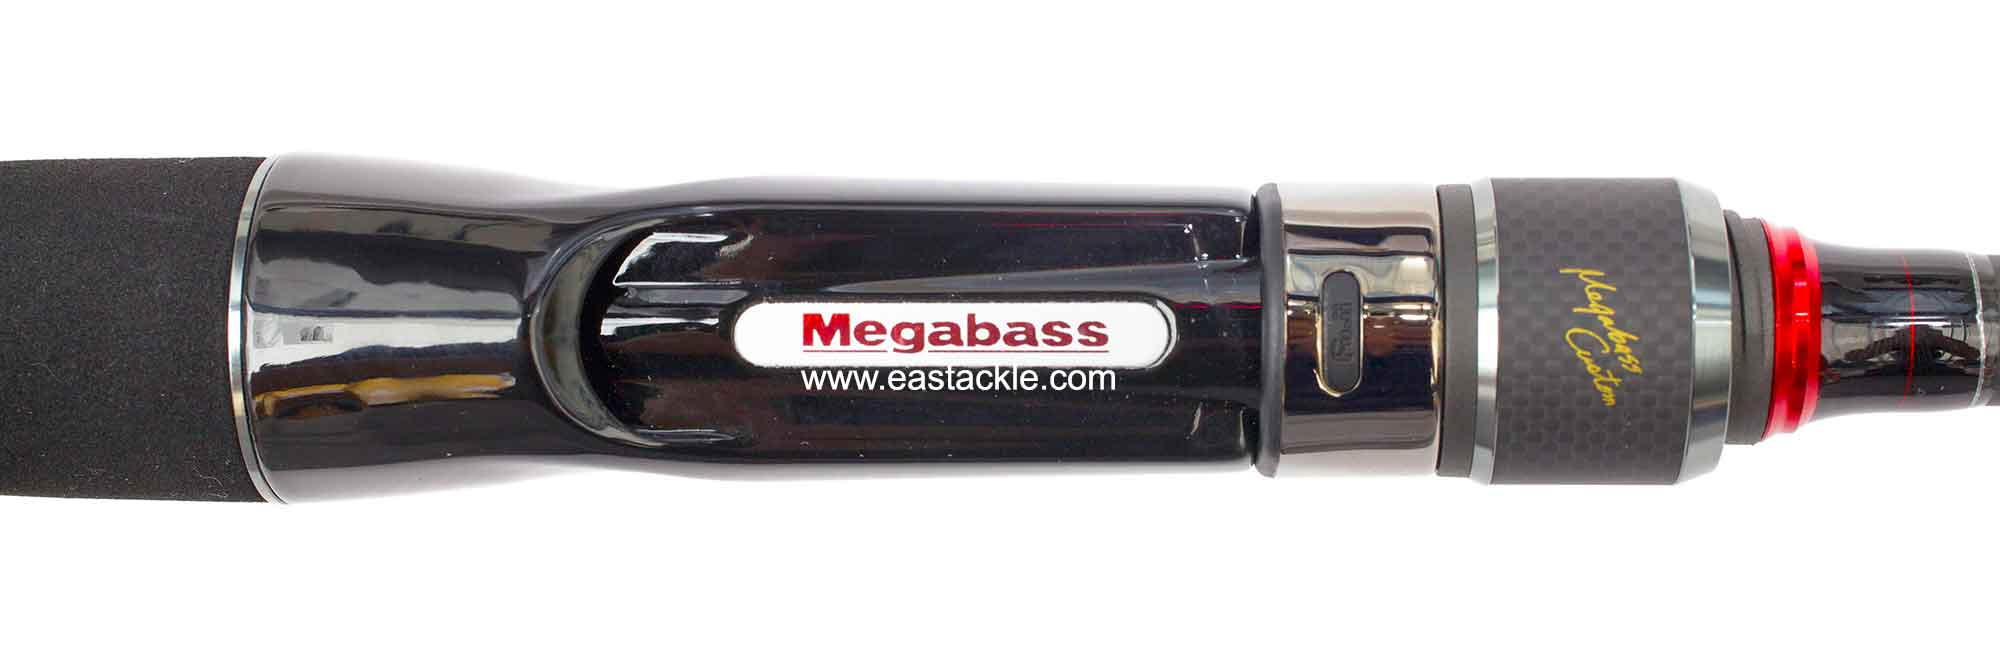 Megabass - Racing Condition World Edition - RCC-662M - Bait Casting Rod - Reel Seat Section (Top View)